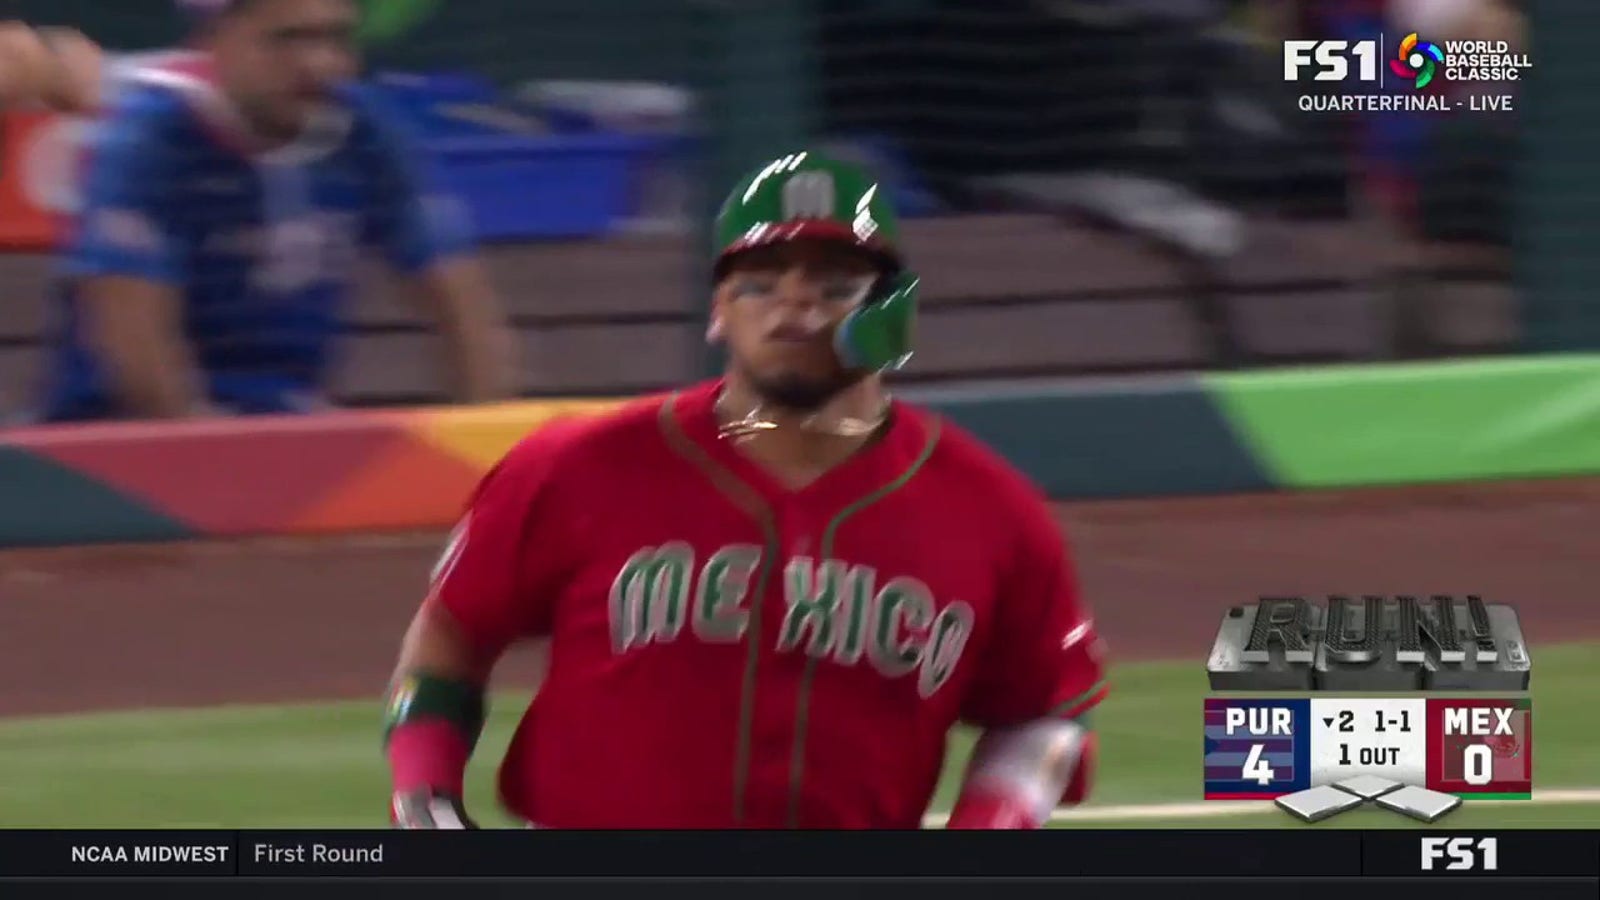 Isaac Paredes blasts a solo home run, cutting Puerto Rico's lead over Mexico to 4-1